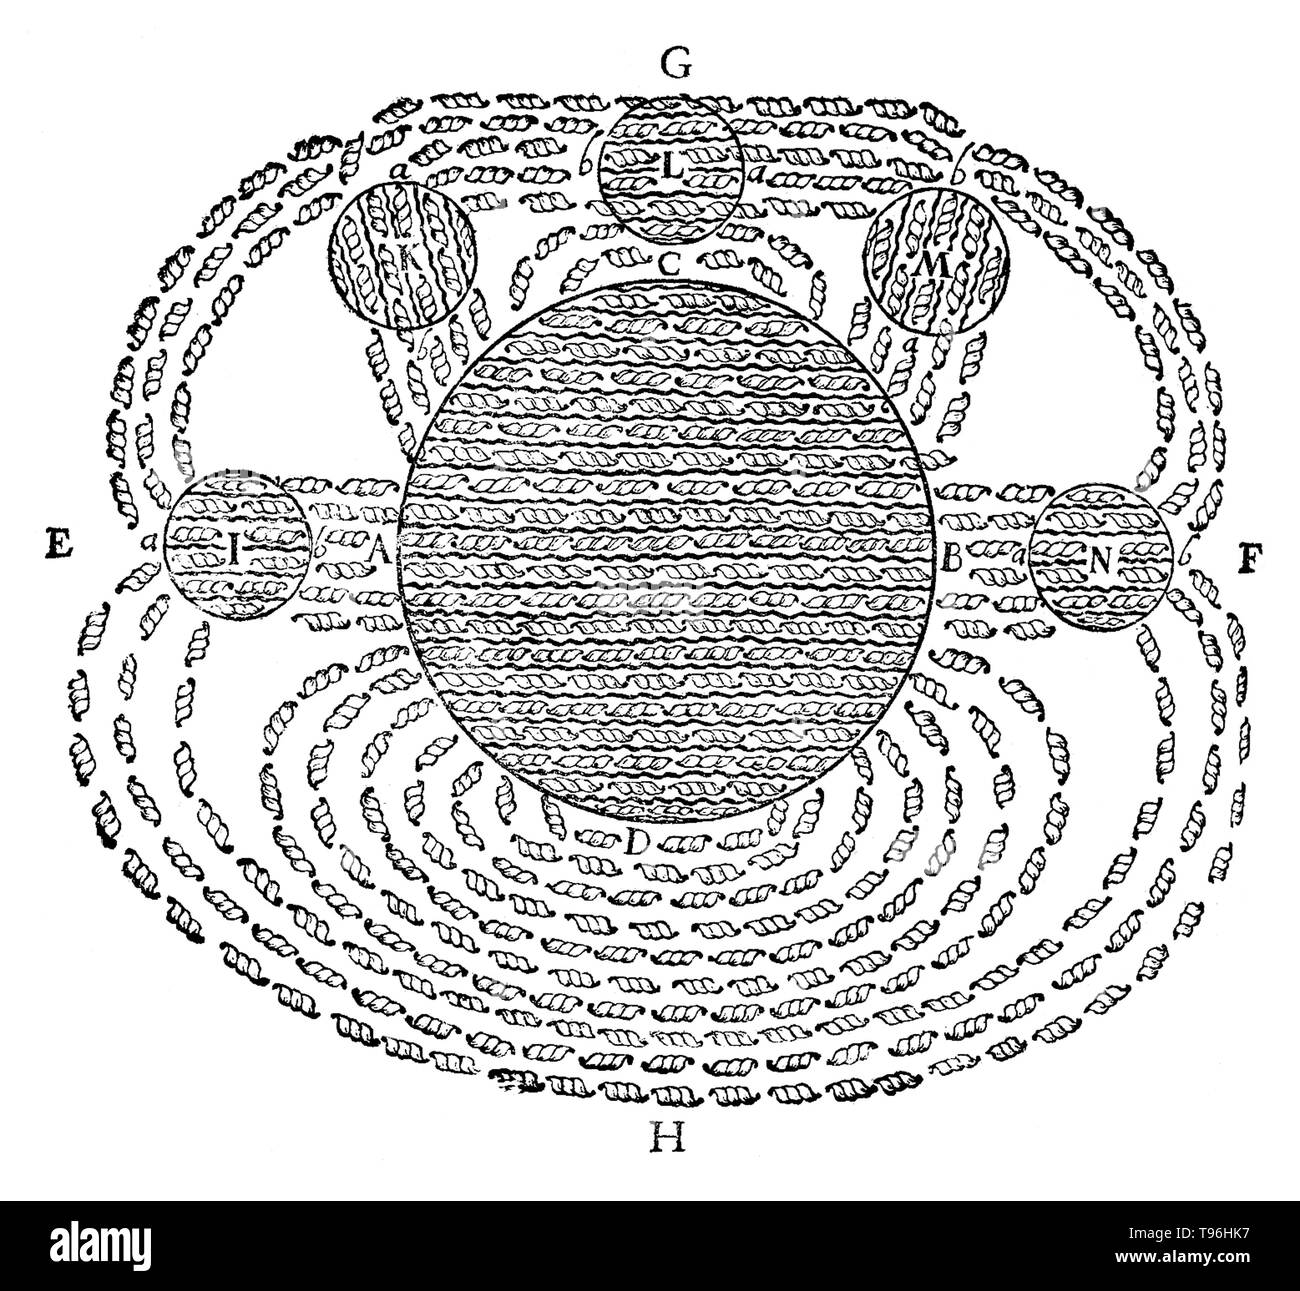 Magnetic field by René Descartes, from his Principia Philosophiae, 1644. This was one of the first drawings of the concept of a magnetic field. It shows the magnetic field of the Earth (D) attracting several round lodestones (I, K, L, M, N) and illustrates his theory of magnetism. Stock Photo